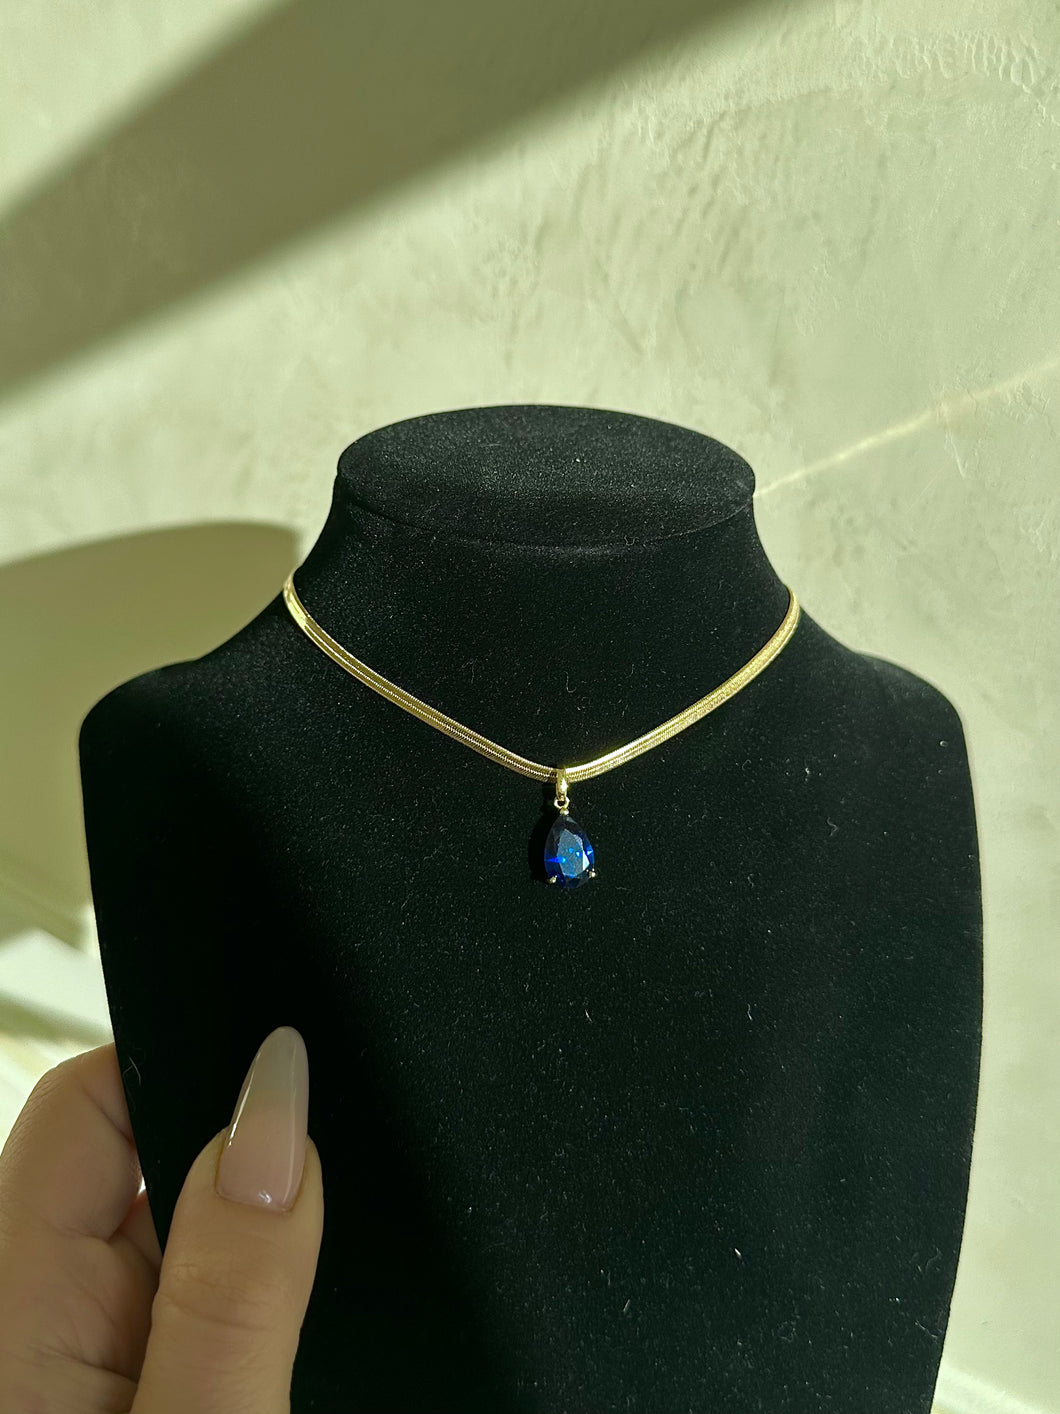 The Gold Sapphire Necklace